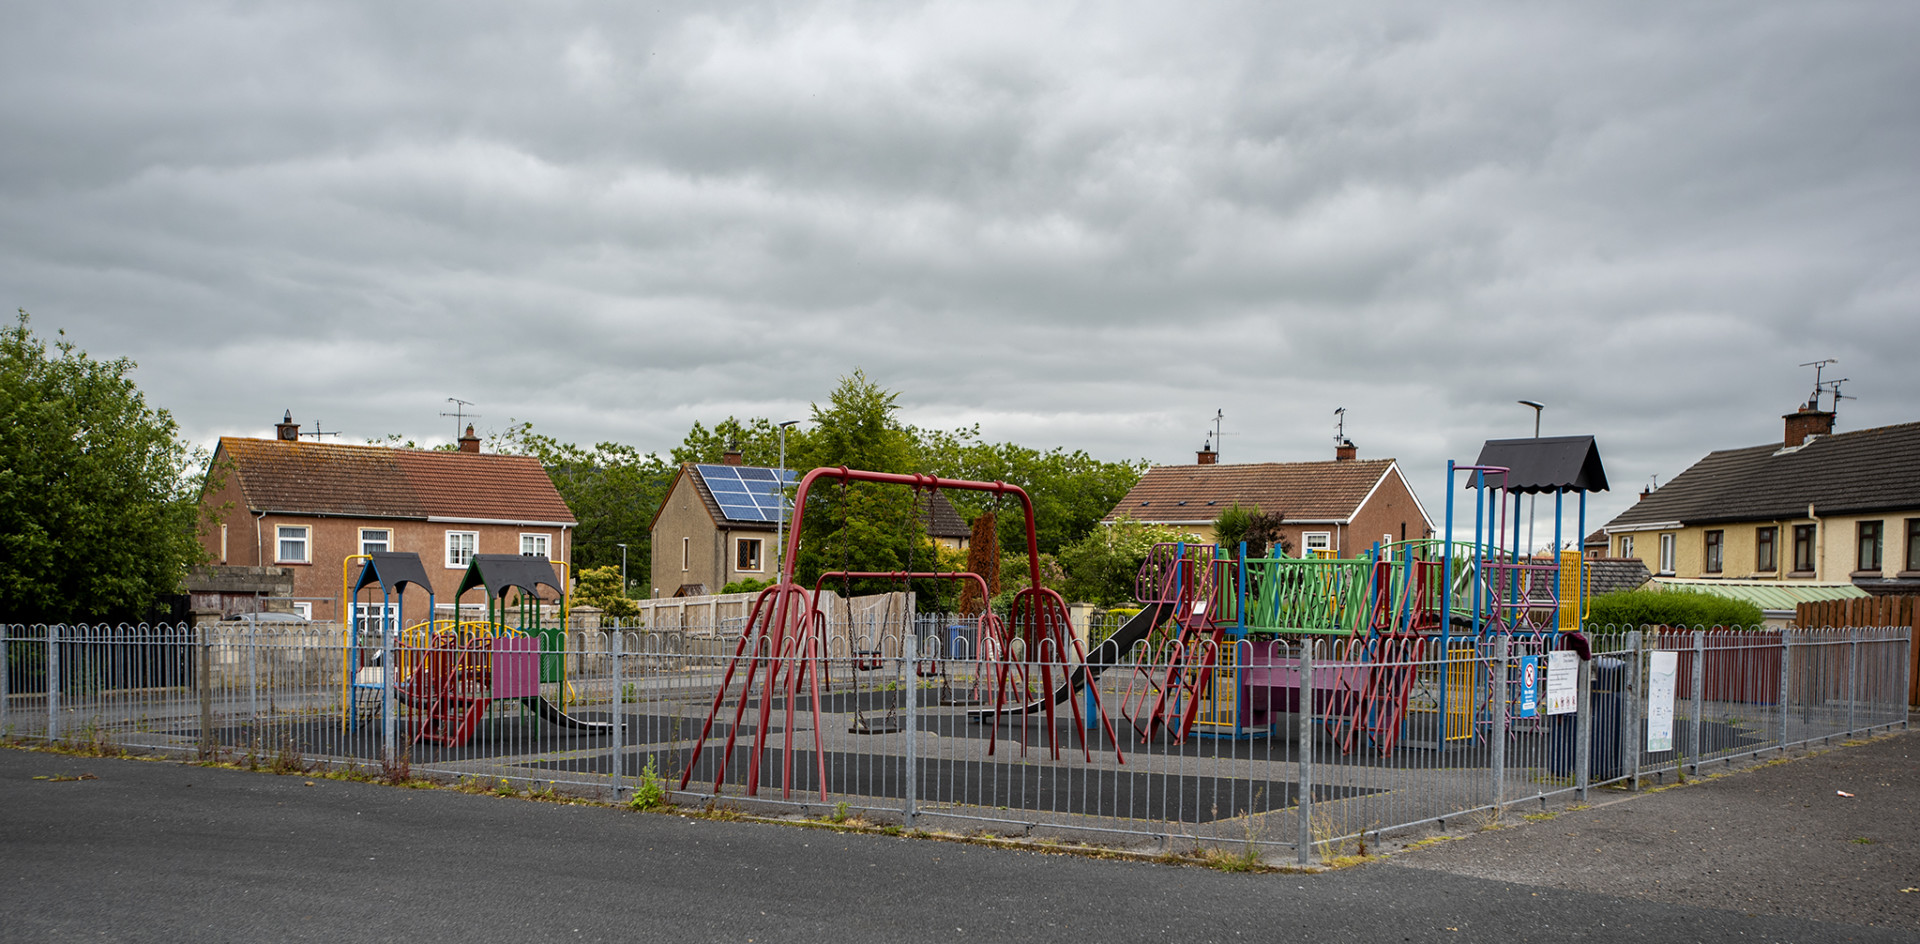 Play facility redevelopment ‘long overdue’ for Clady